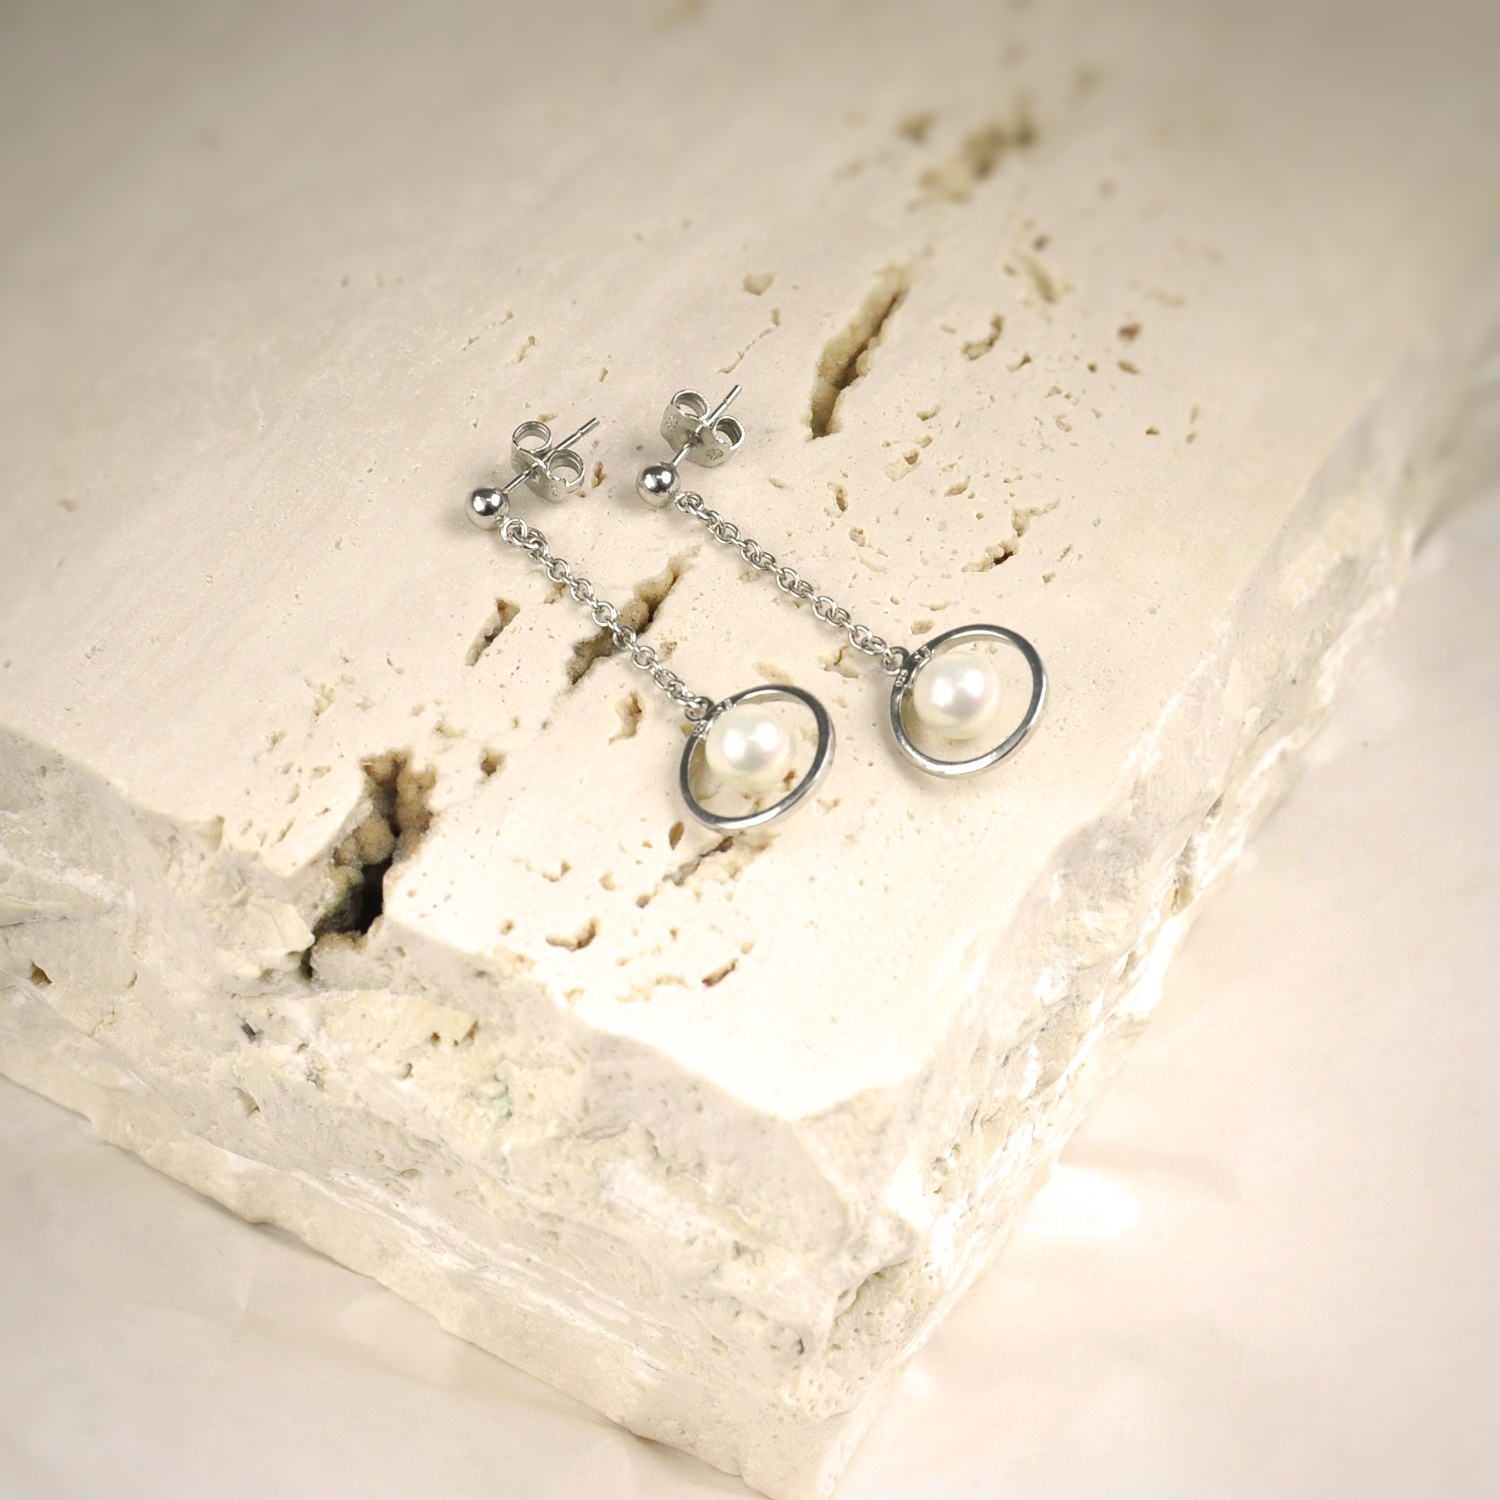 Silver Earrings with 7 mm. White Pearls 1